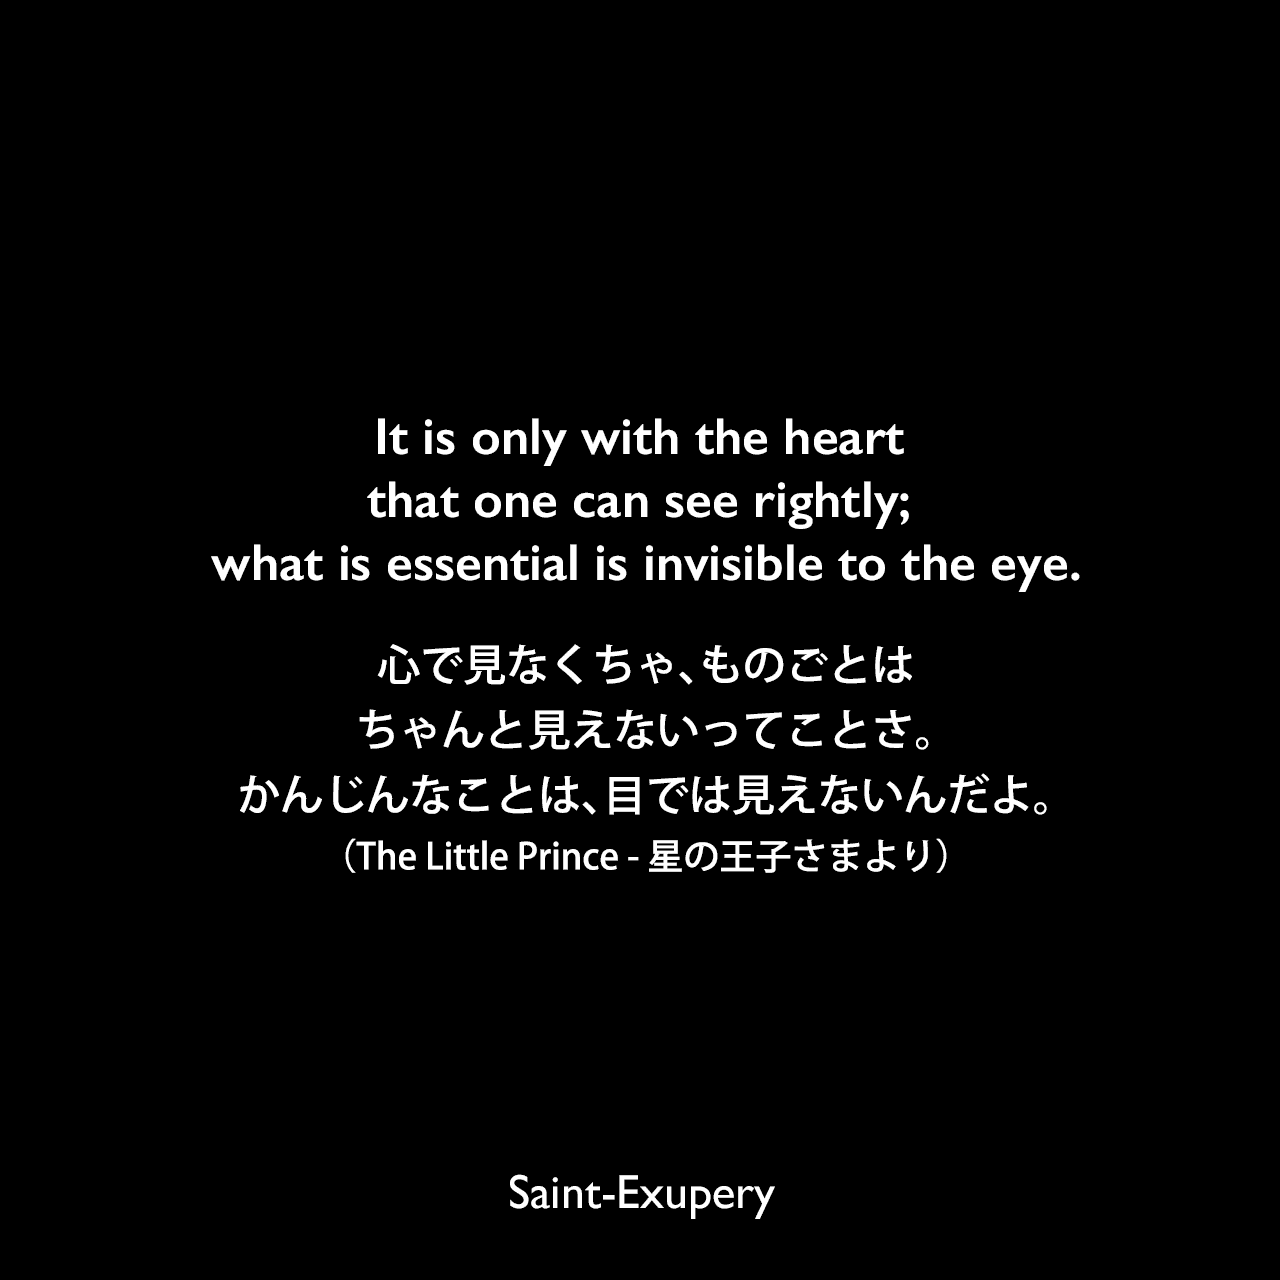 It is only with the heart that one can see rightly; what is essential is invisible to the eye.心で見なくちゃ、ものごとはちゃんと見えないってことさ。かんじんなことは、目では見えないんだよ。（The Little Prince - 星の王子さまより）Saint-Exupery